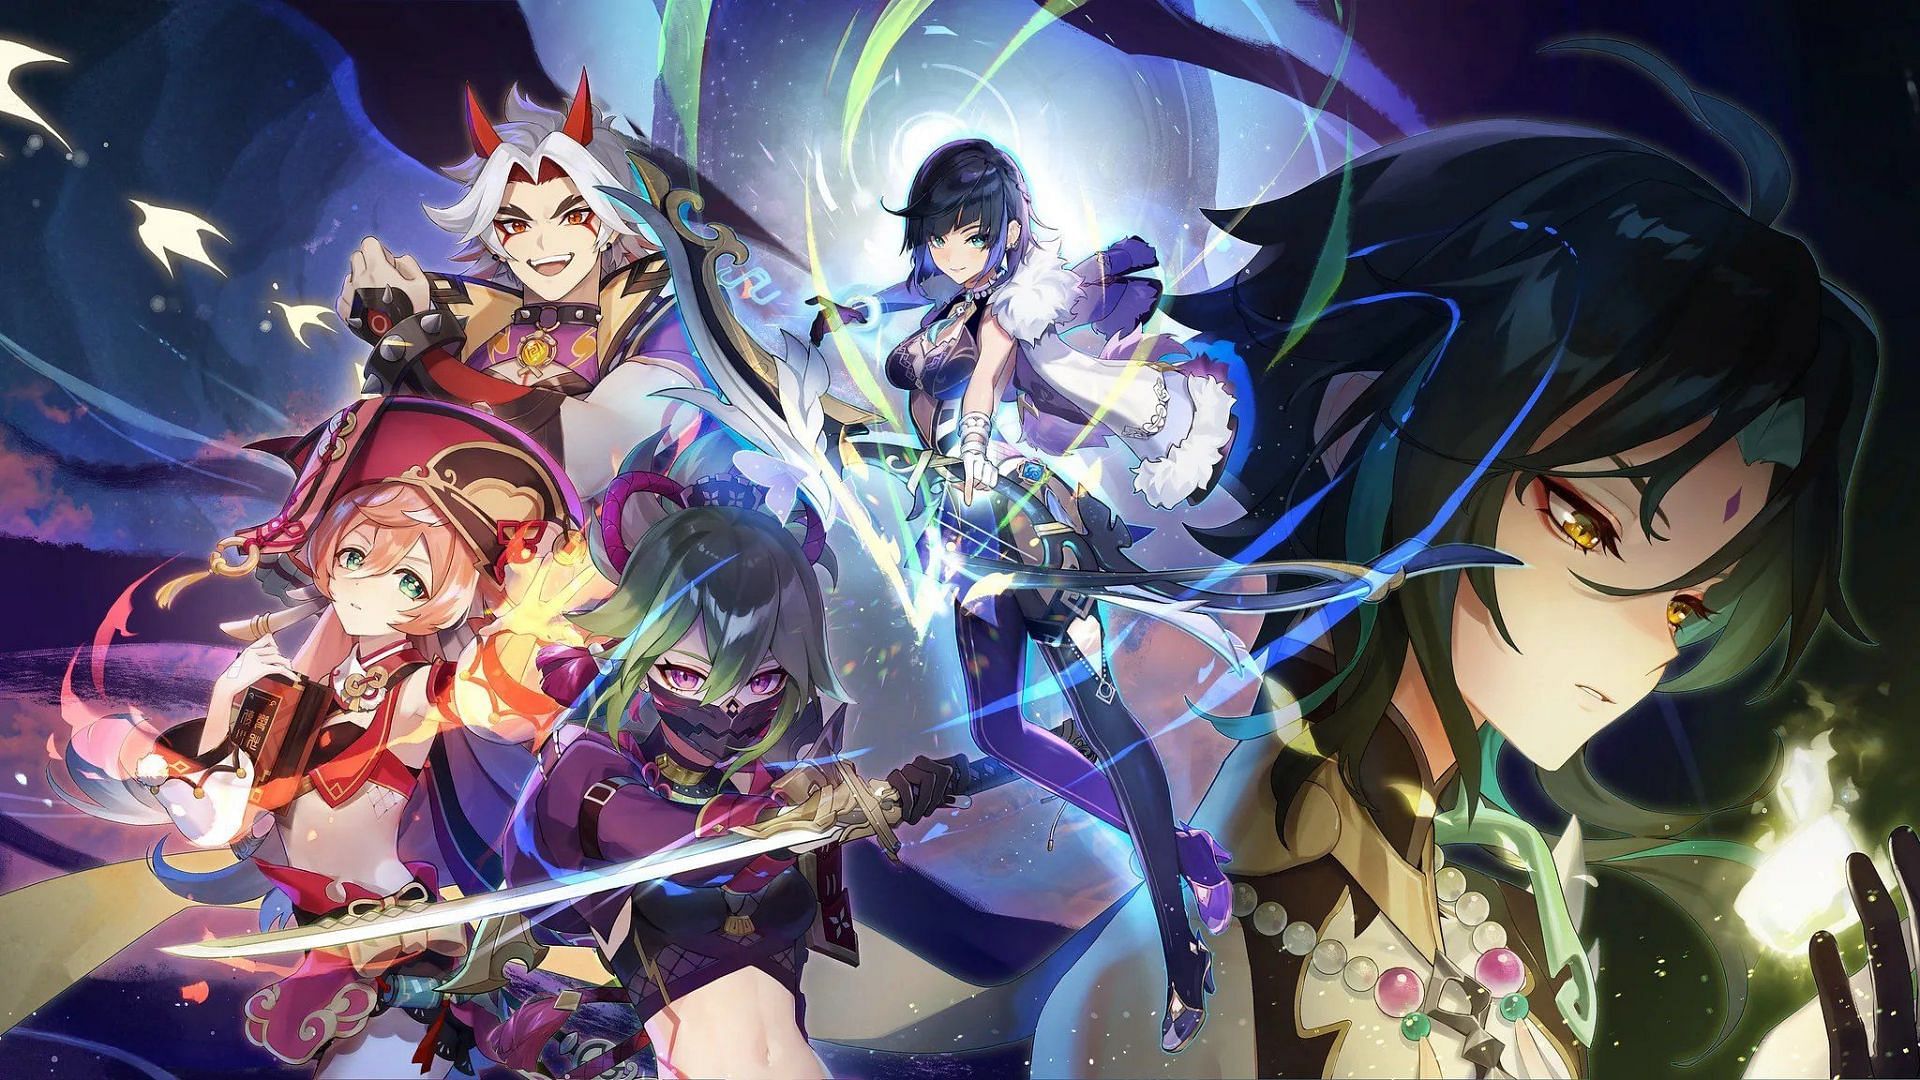 Genshin Impact version 2.7 character and weapon banners revealed (Image via HoYoverse)